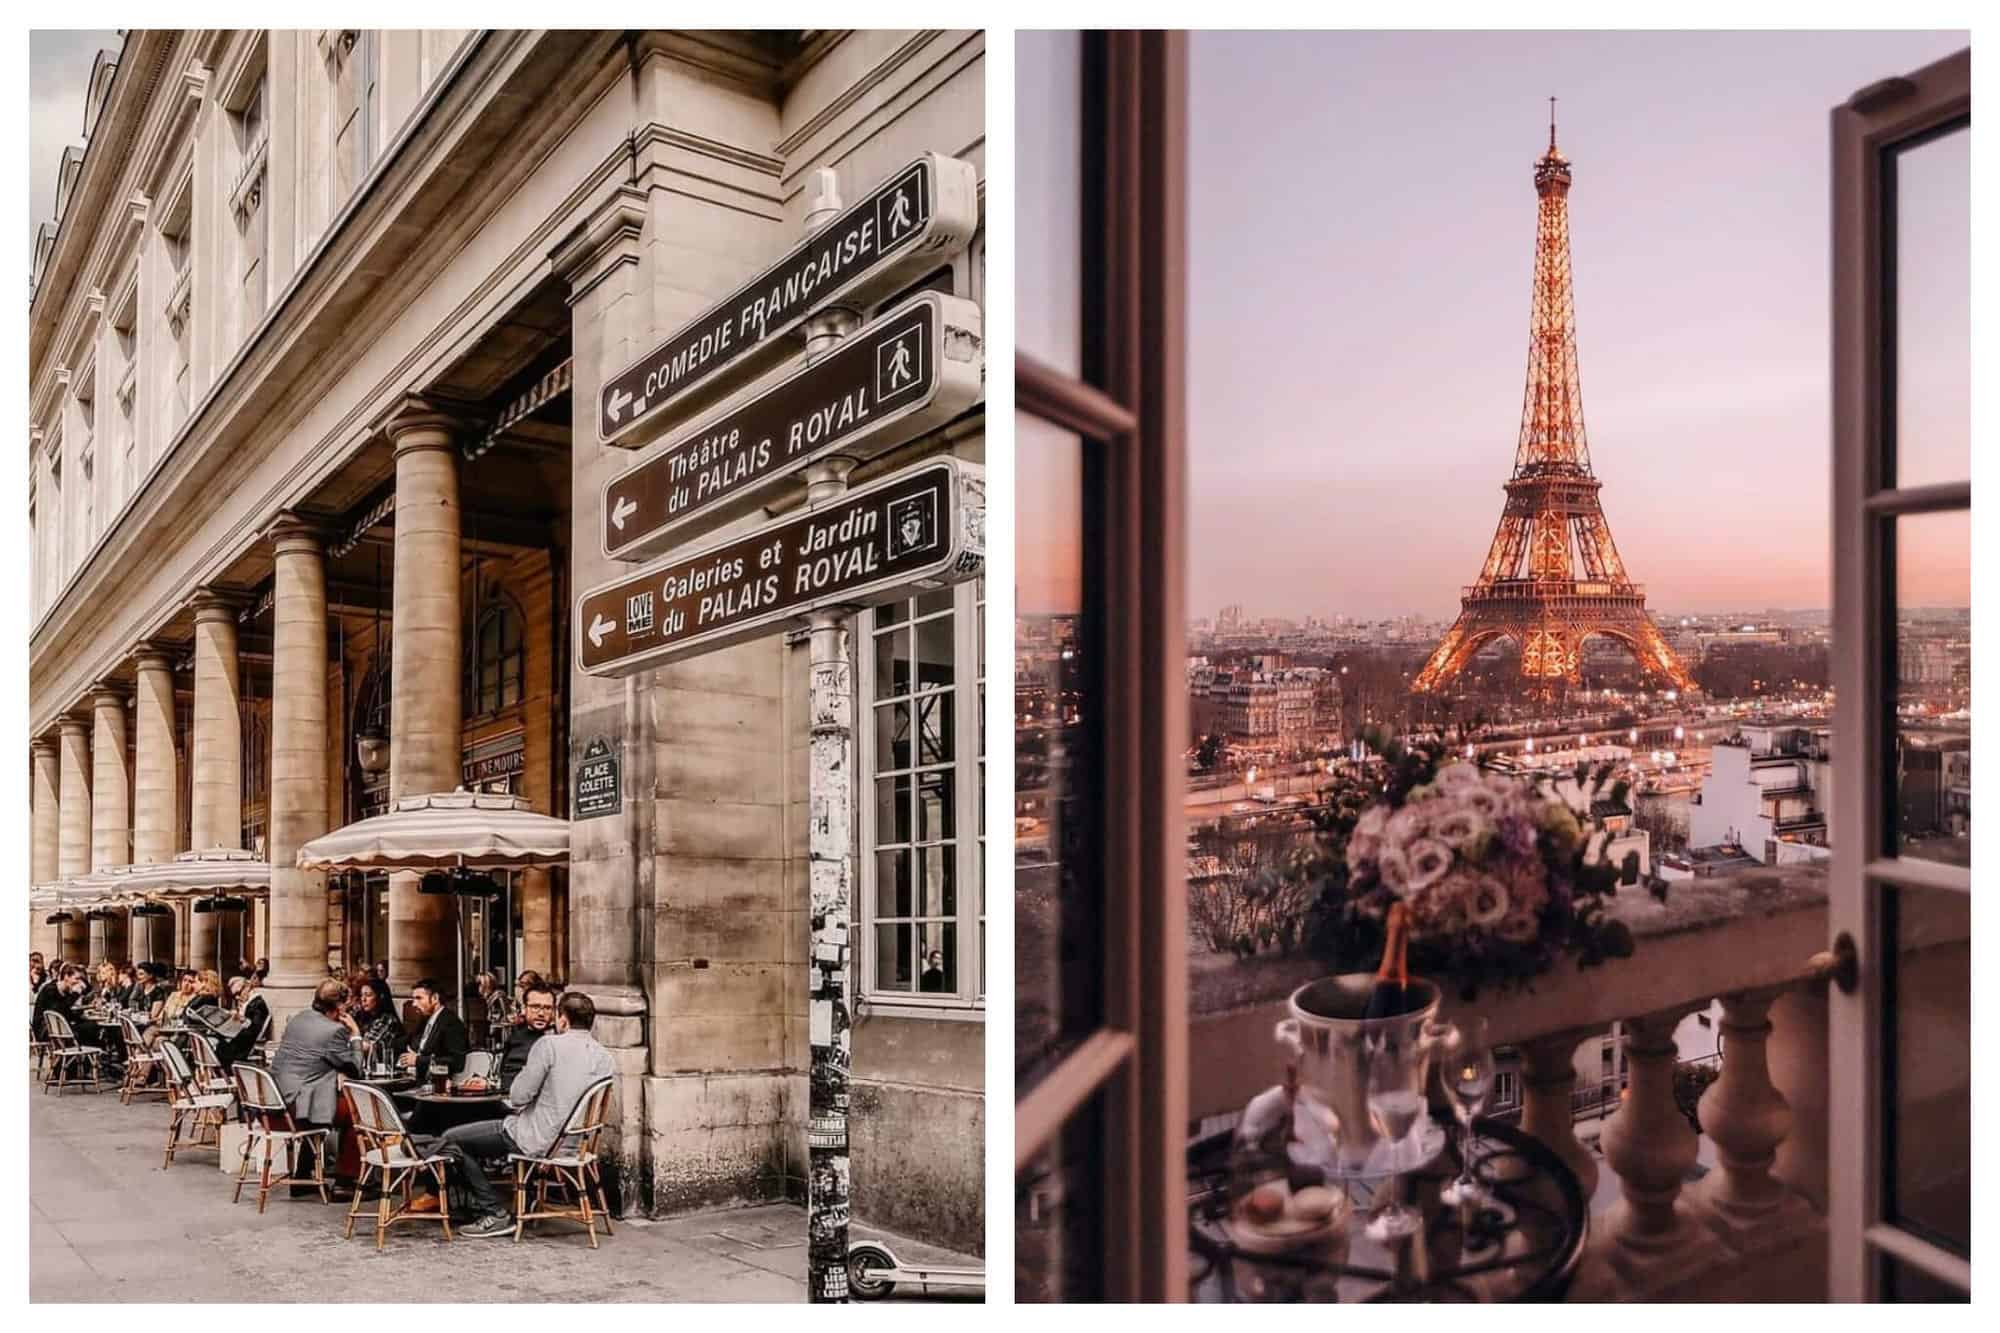 Left: a photo of Cafe Nemours terrace in Paris, filled with people drinking coffee outside of Palais Royal.  Right: a photo of the Eiffel Tower taken from an apartment balcony with a table with champagne in a ice bucket and two glasses. 